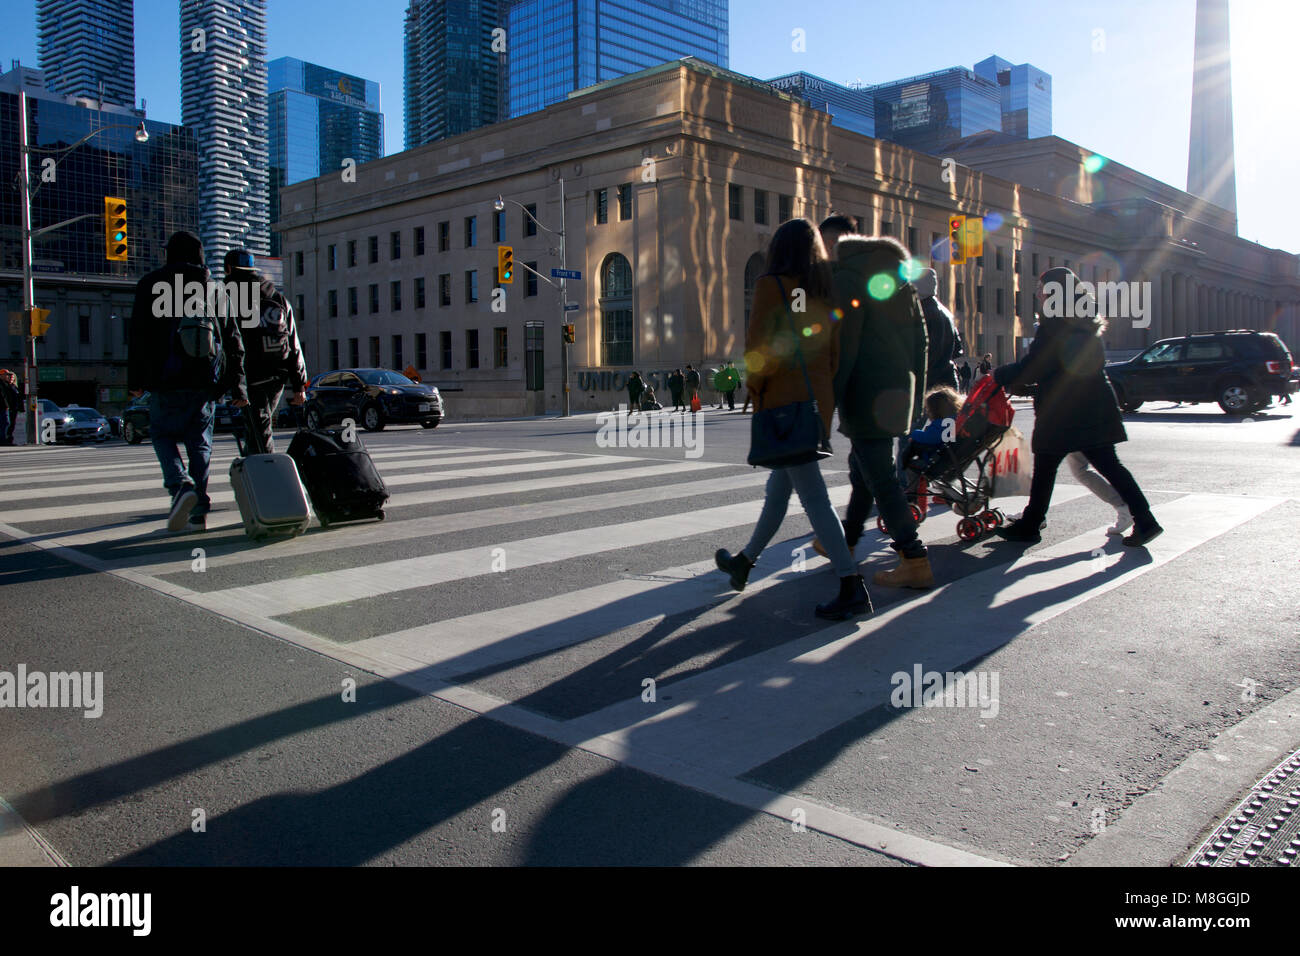 Toronto, Ontario/ Canada - 03-04-2018: pedestrian crossing the road at the downtown district Stock Photo